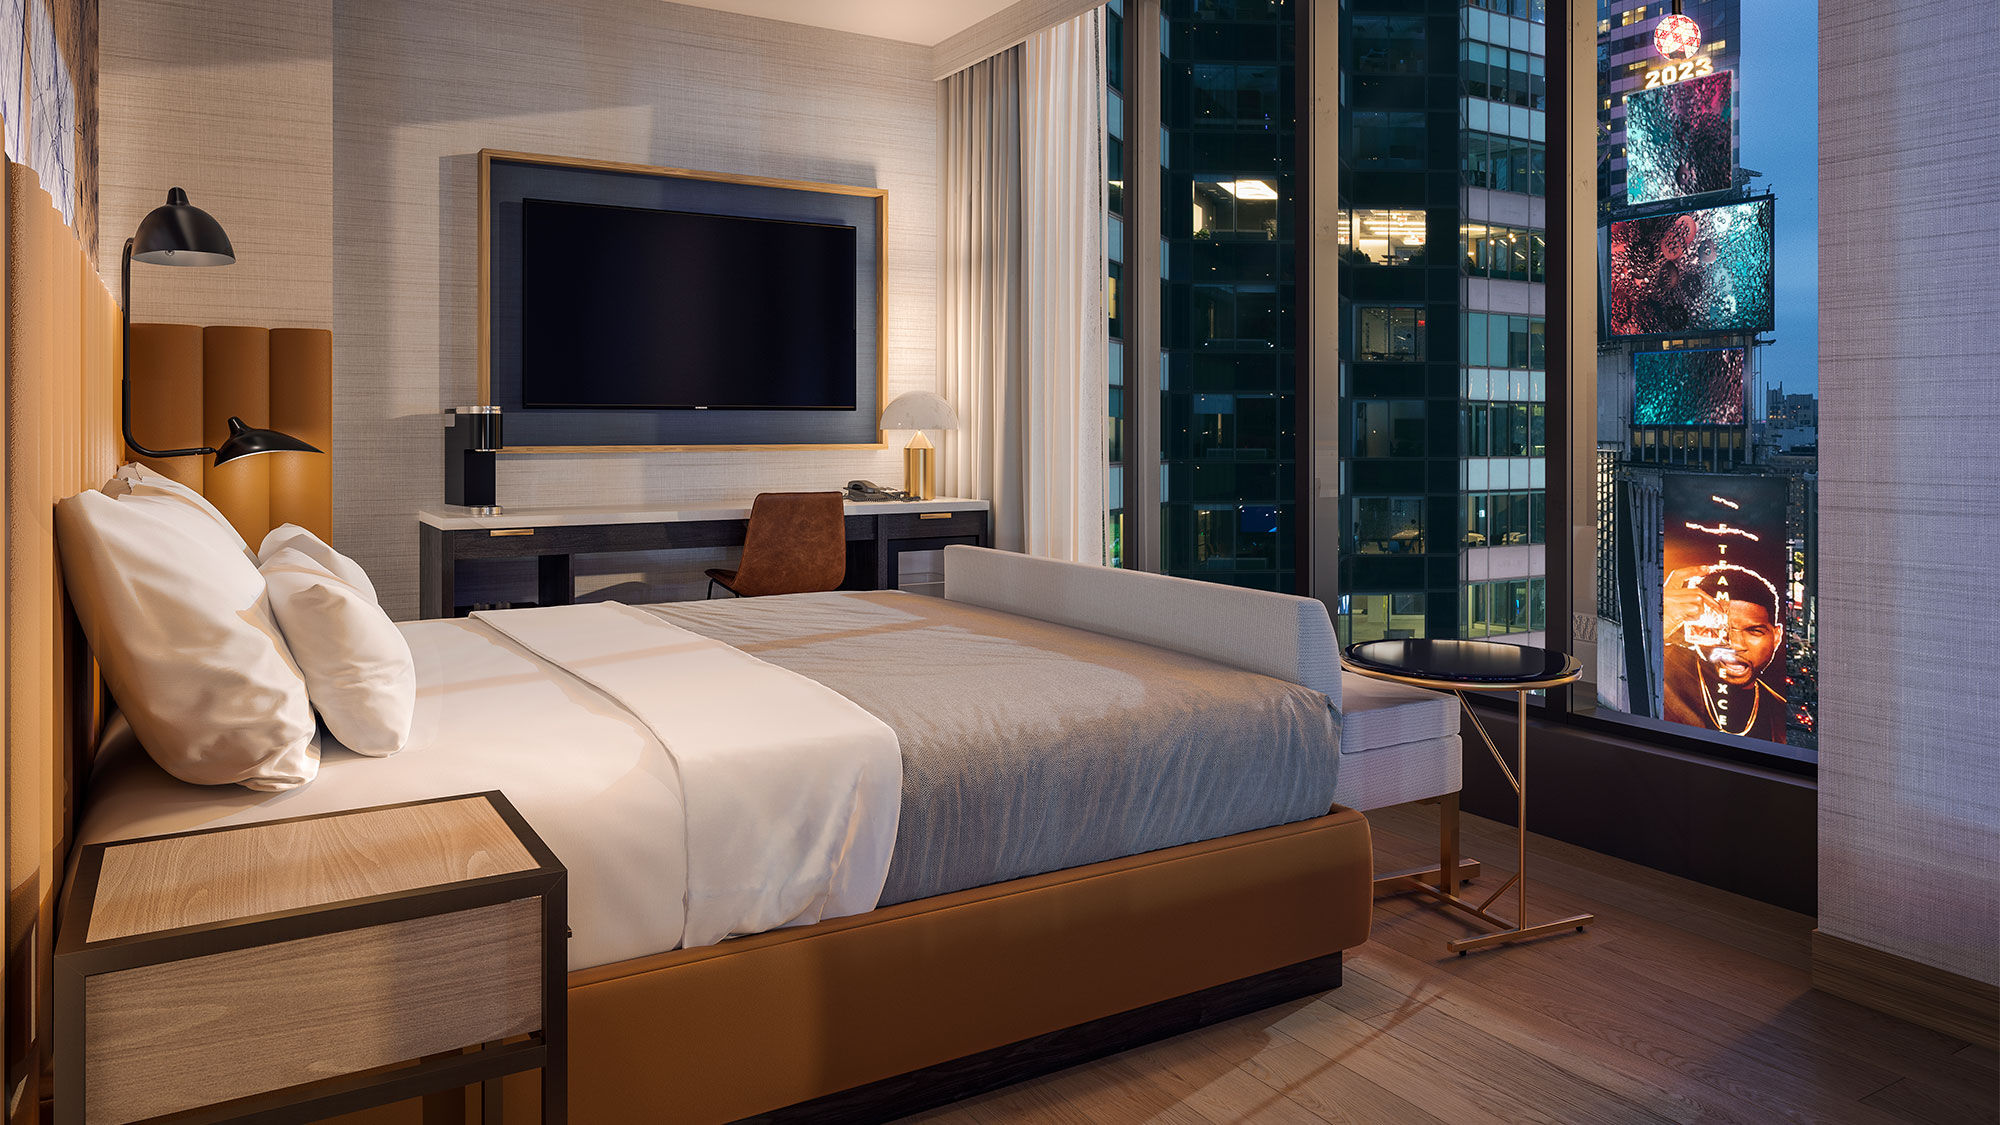 A guestroom at the Tempo by Hilton Times Square.